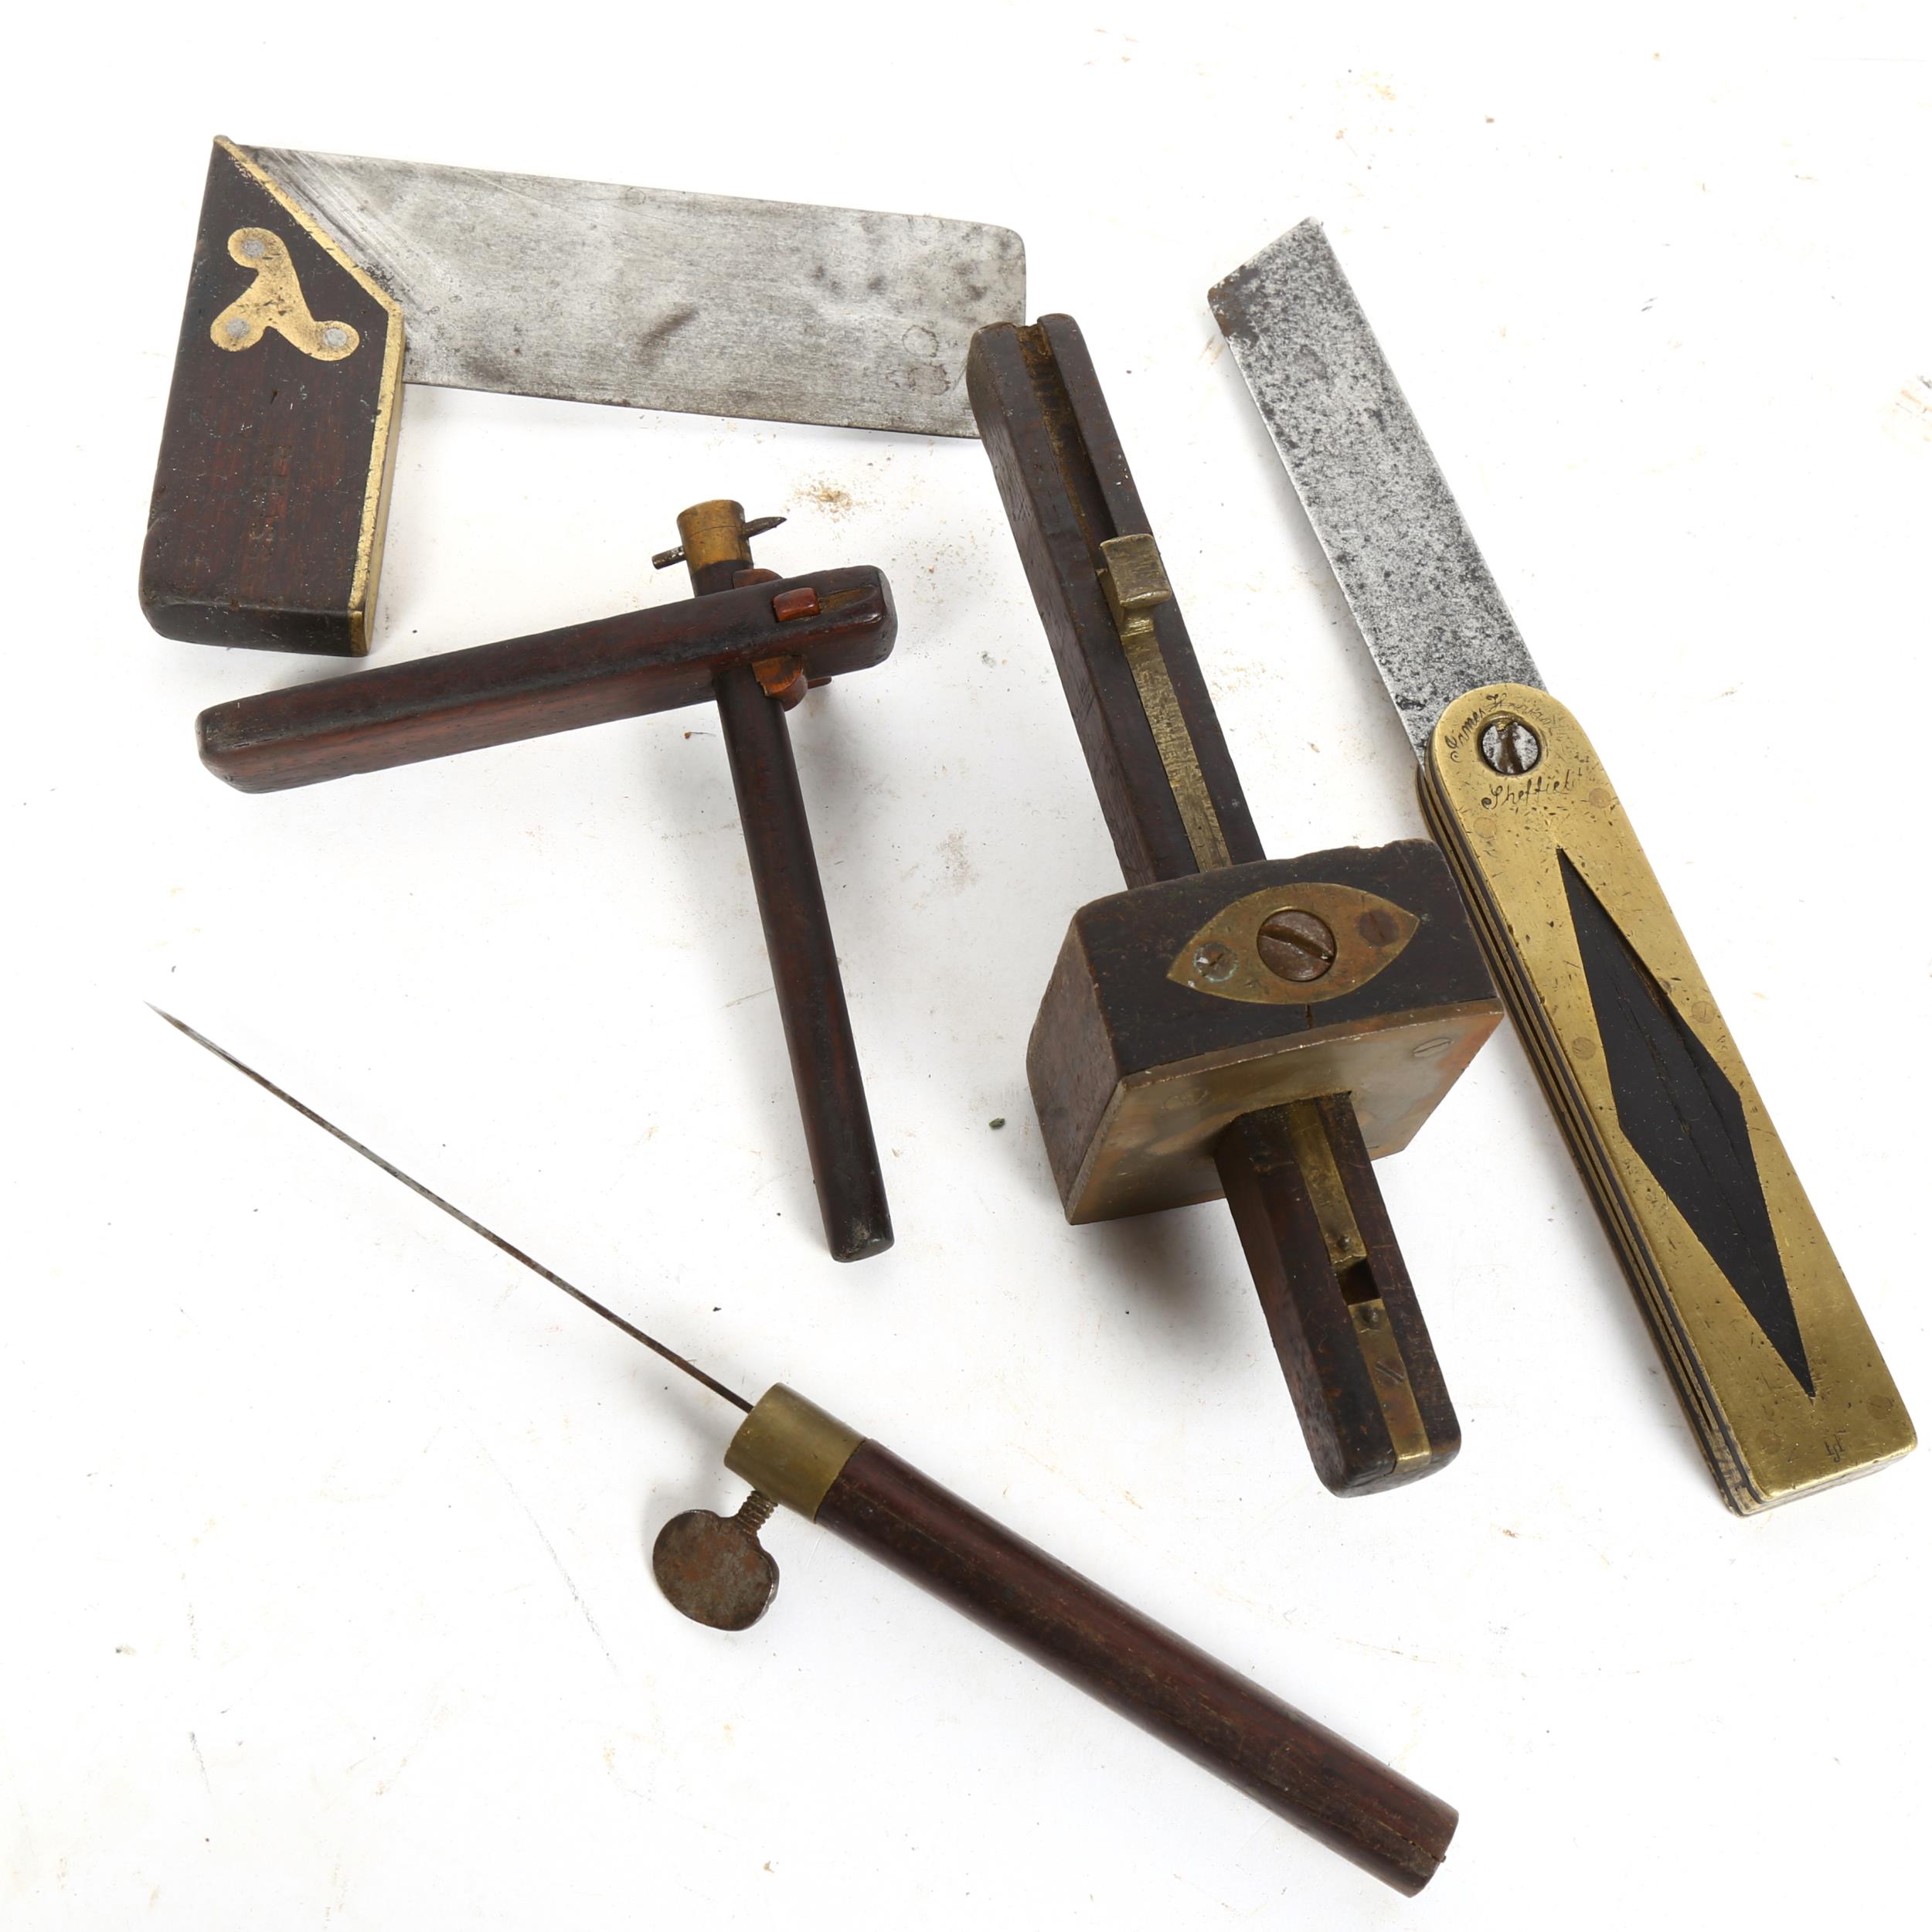 A group of Antique rosewood and brass tools, including set square, mortice gauge etc